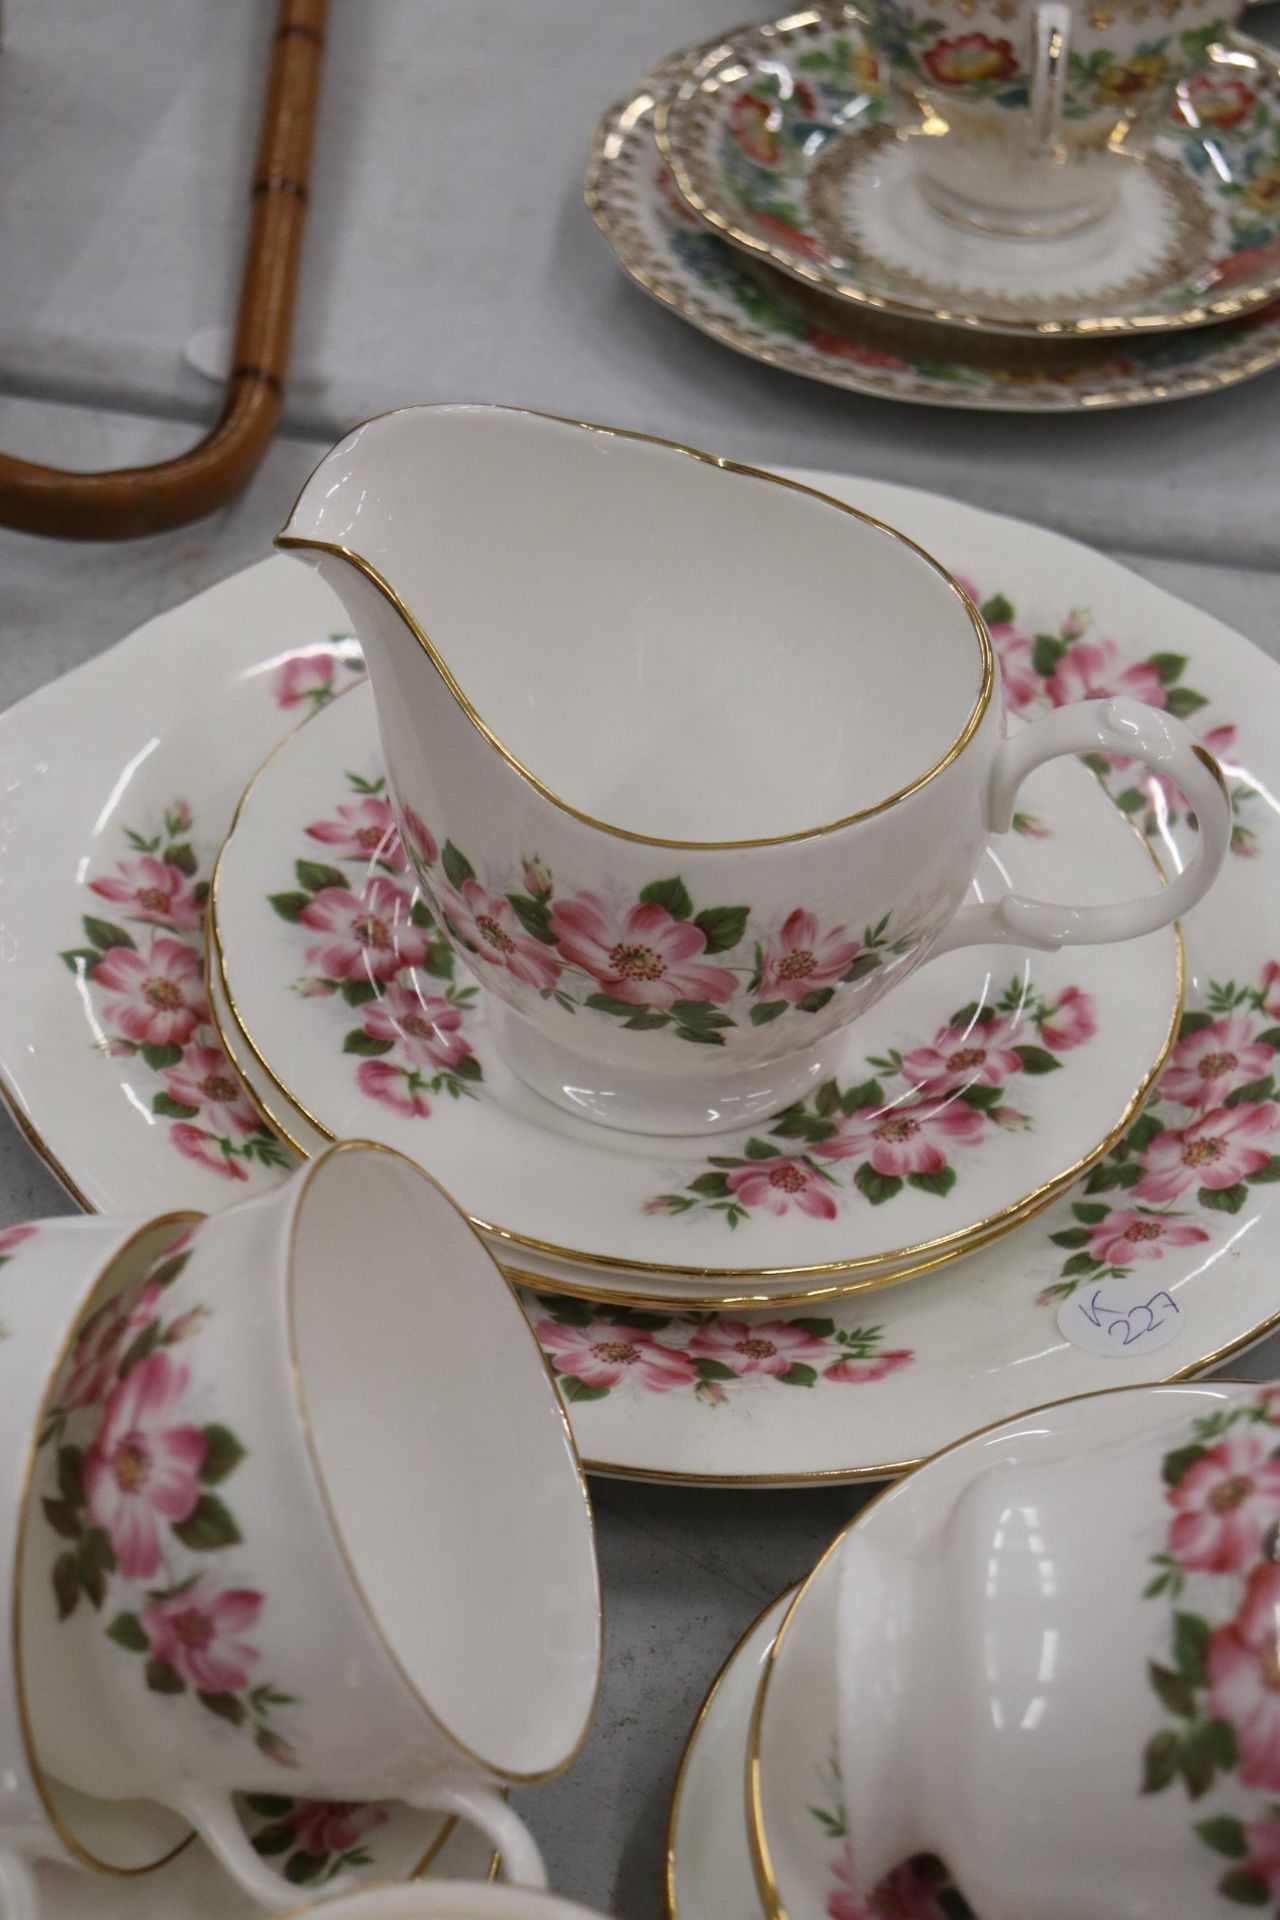 A ROYAL KENT, FLORAL, CHINA TEASET TO INCLUDE A CAKE PLATE, CREAM JUG, SUGAR BOWL, CUPS, SAUCERS AND - Image 8 of 11